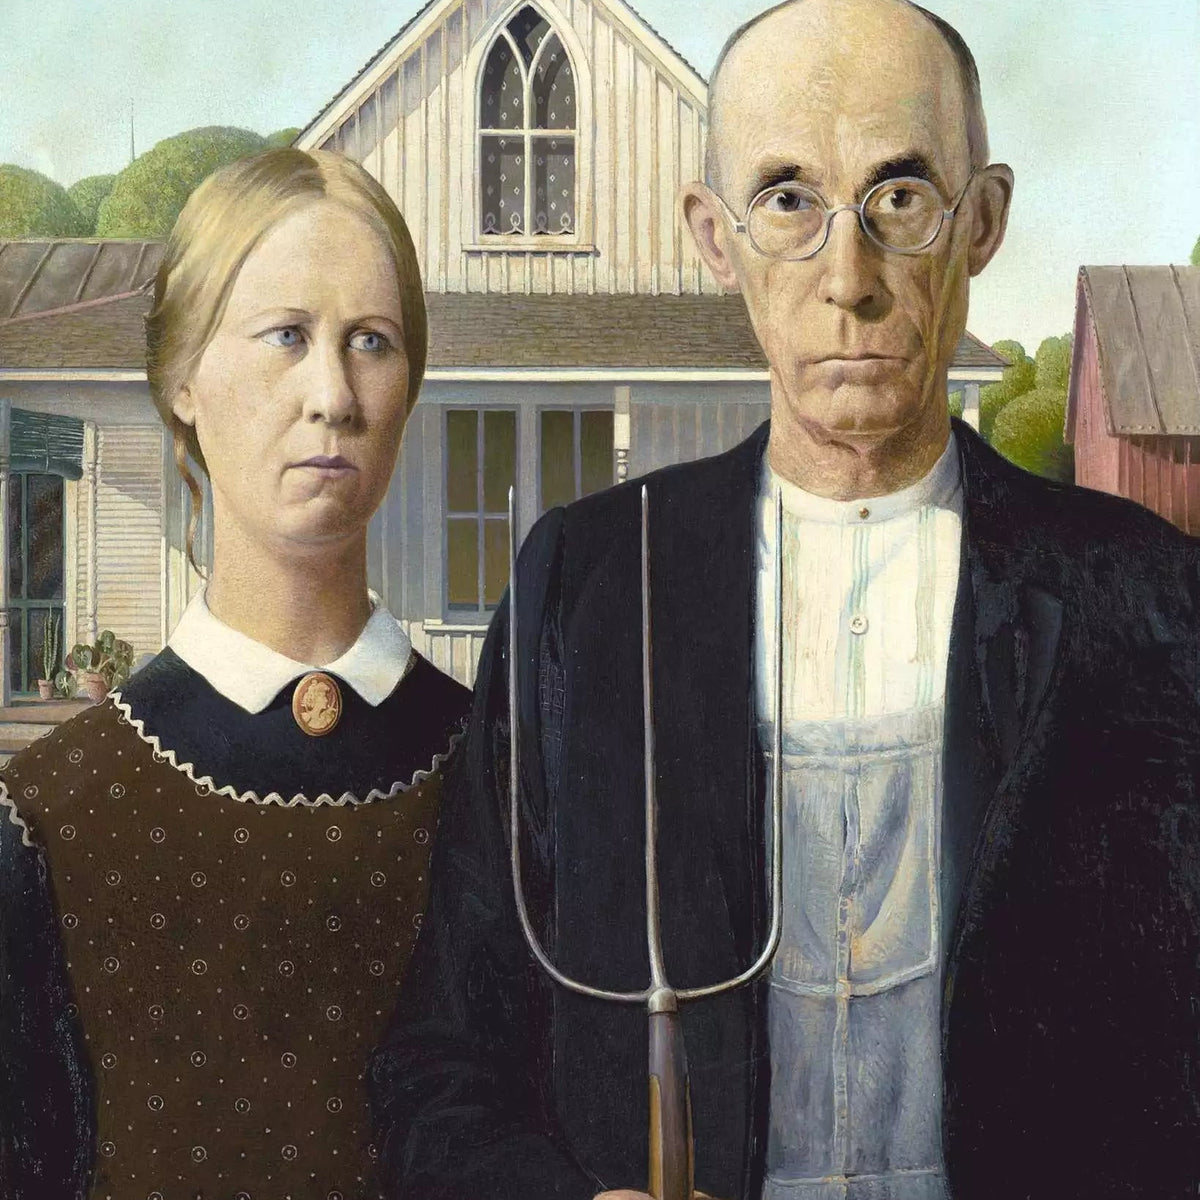 American Gothic - Diamond Painting-Diamond Painting-16"x20" (40x50cm)-Canvas by Numbers US